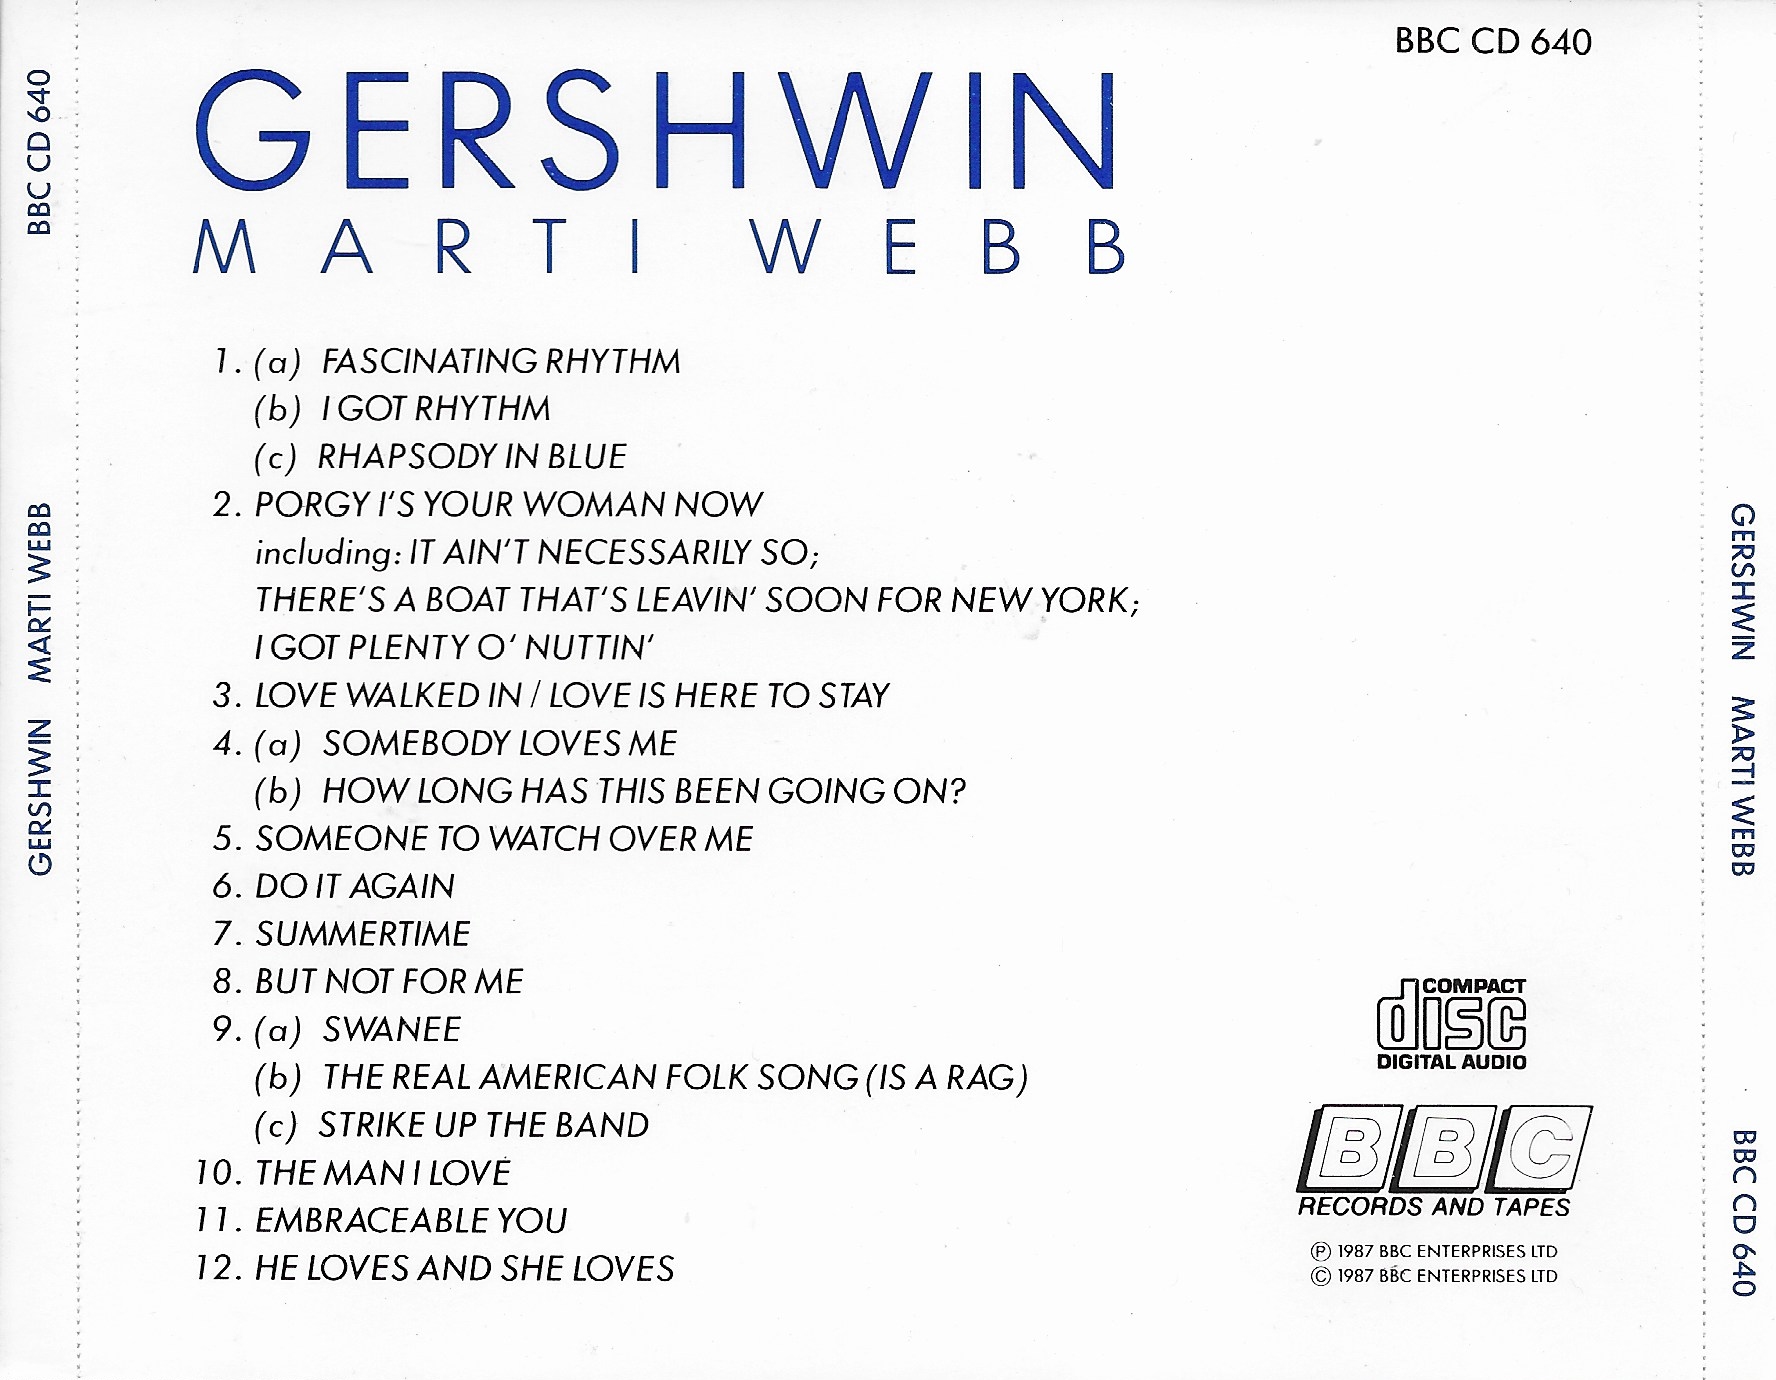 Picture of BBCCD640 Gershwin by artist Marti Webb from the BBC records and Tapes library